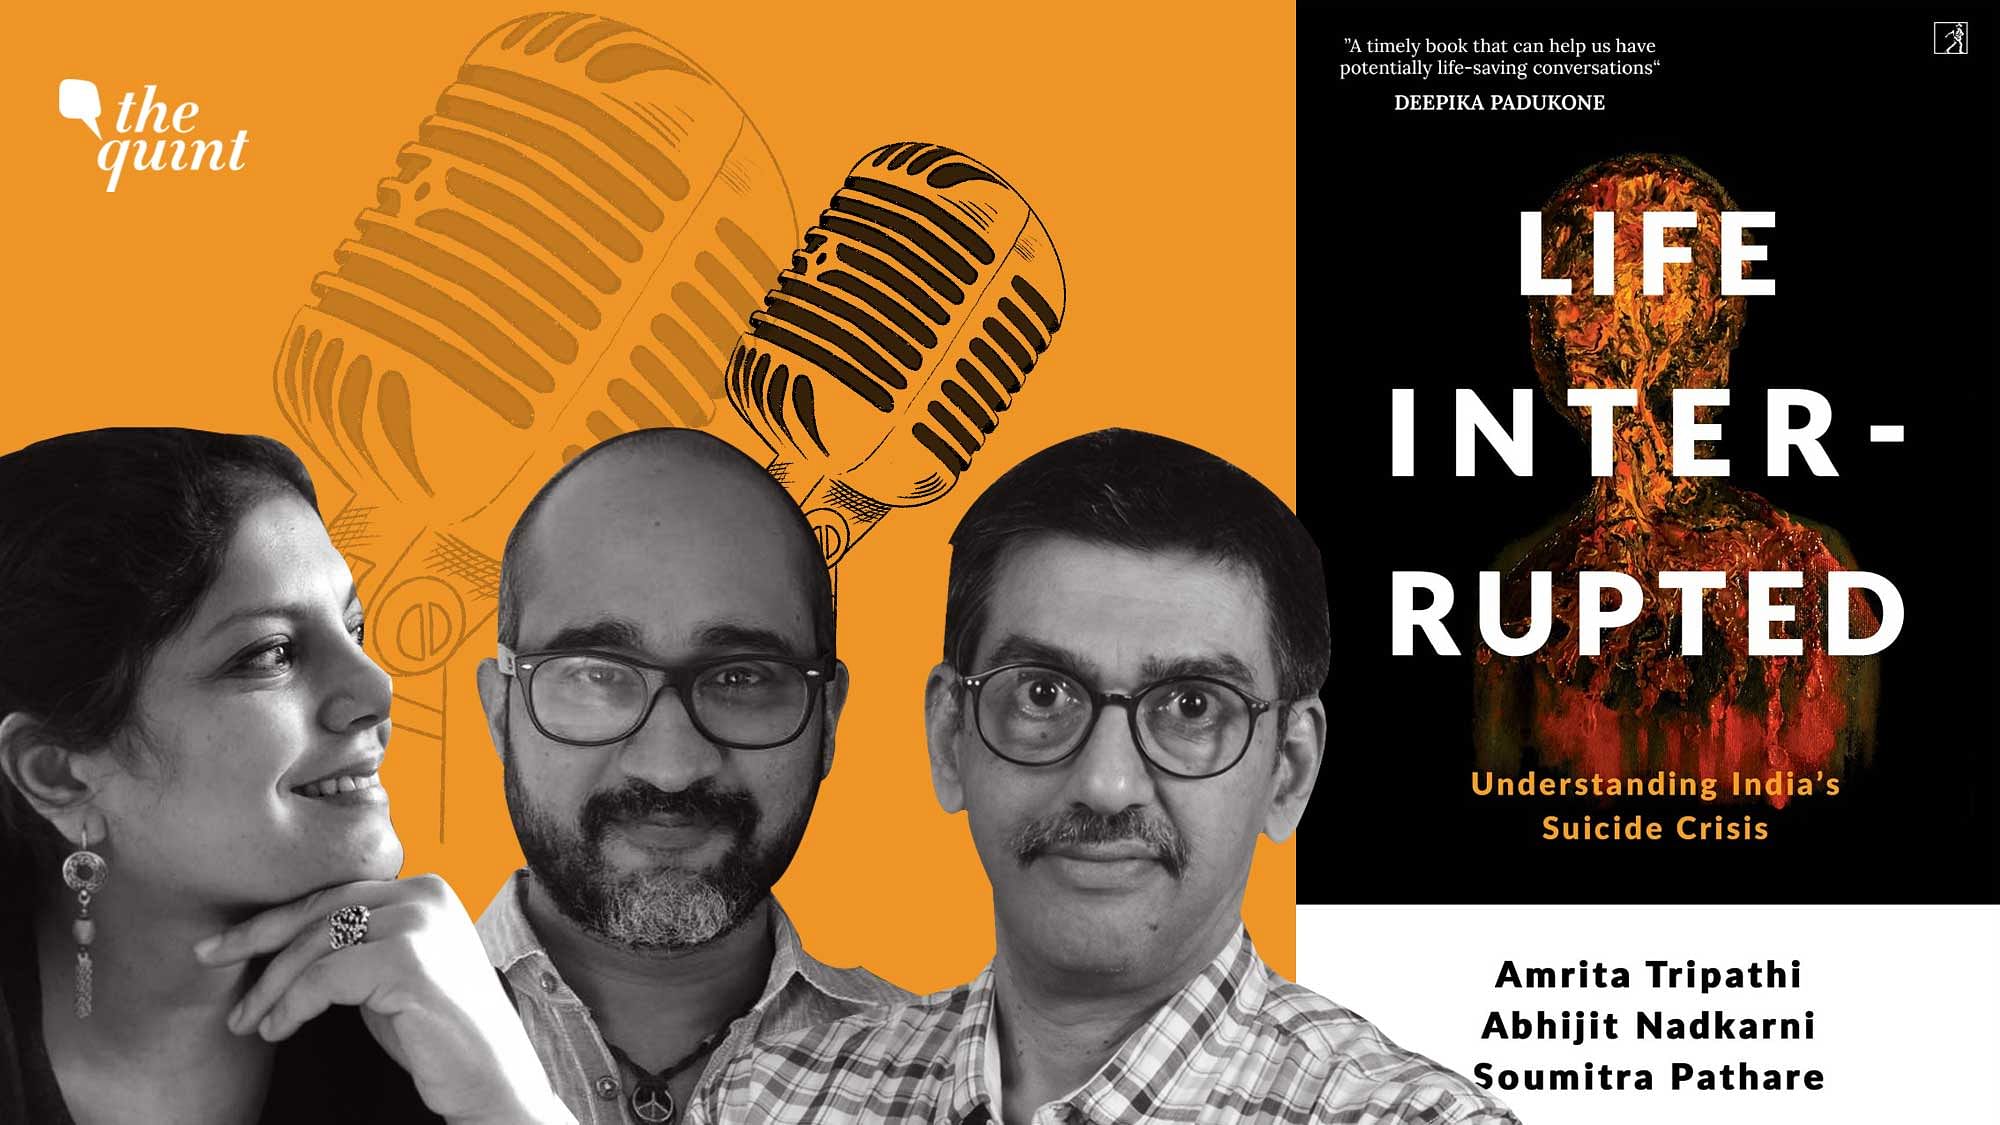 <div class="paragraphs"><p>A new book <em>Life Interrupted - Understanding India's Suicide Crisis</em> is questioning the media narrative and serves as an excellent resource for those who wish to understand what's driving India's suicide crisis.</p></div>